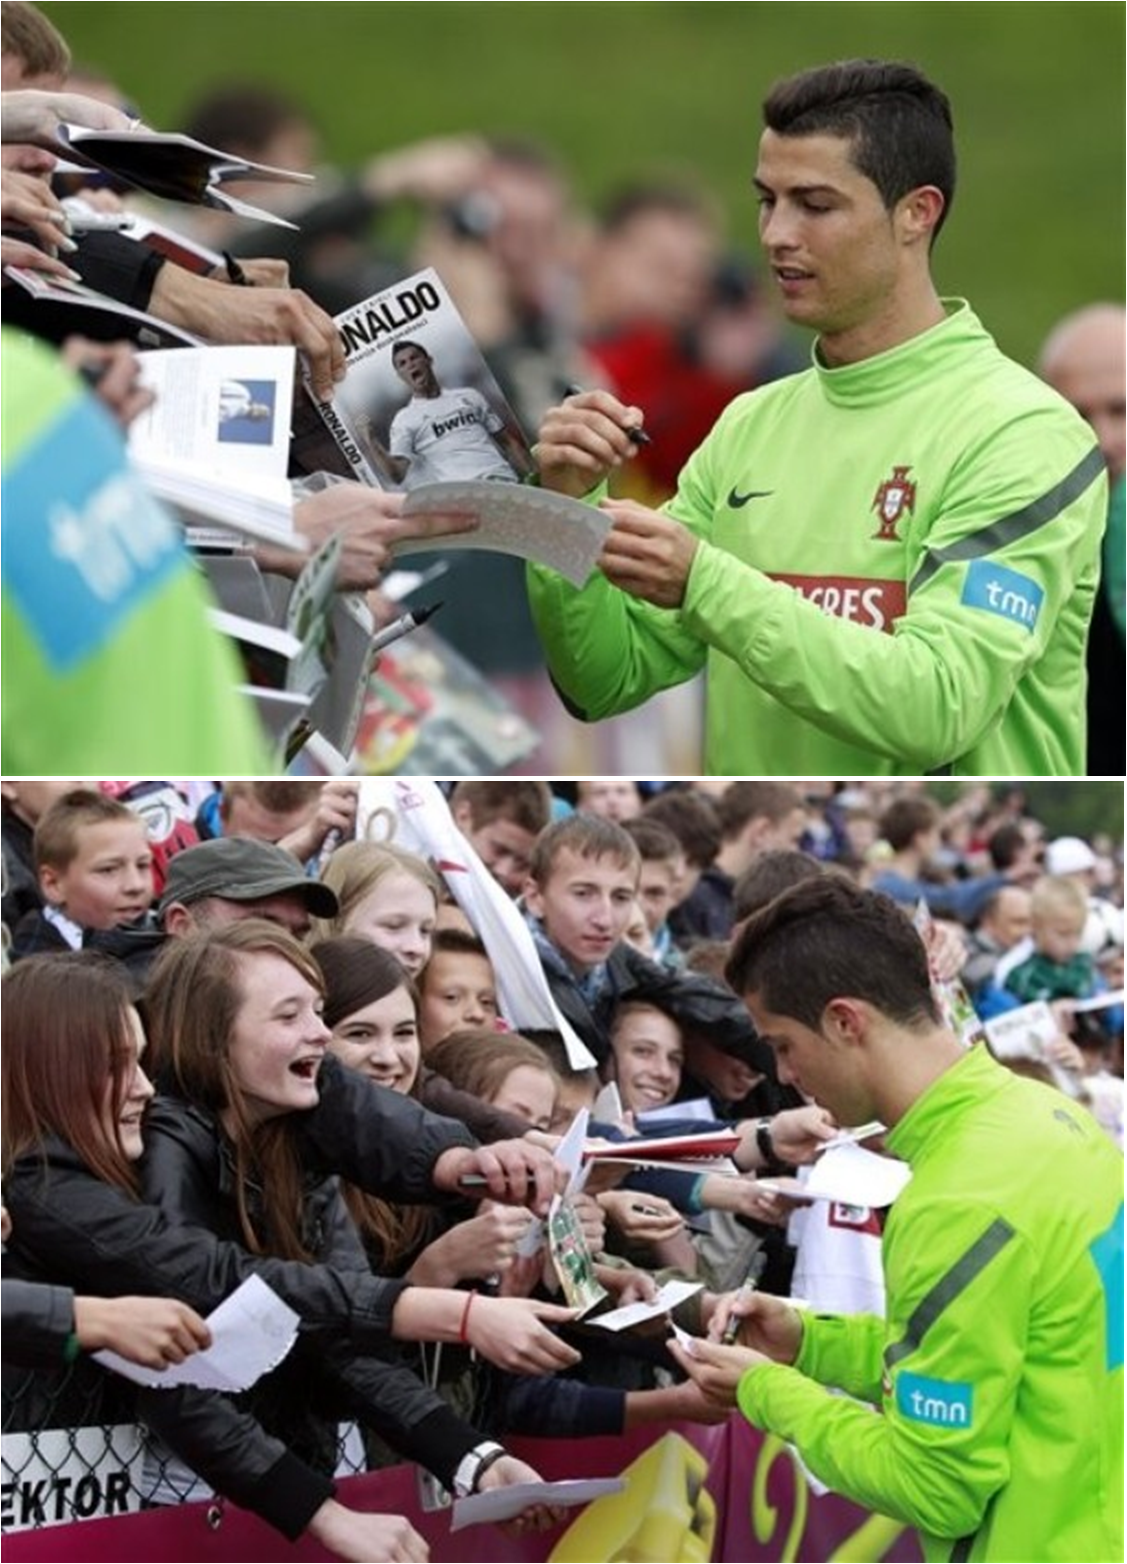  Making the fans happy.
Training in Opalenica 05.06.2012(via Photo from AP Photo)